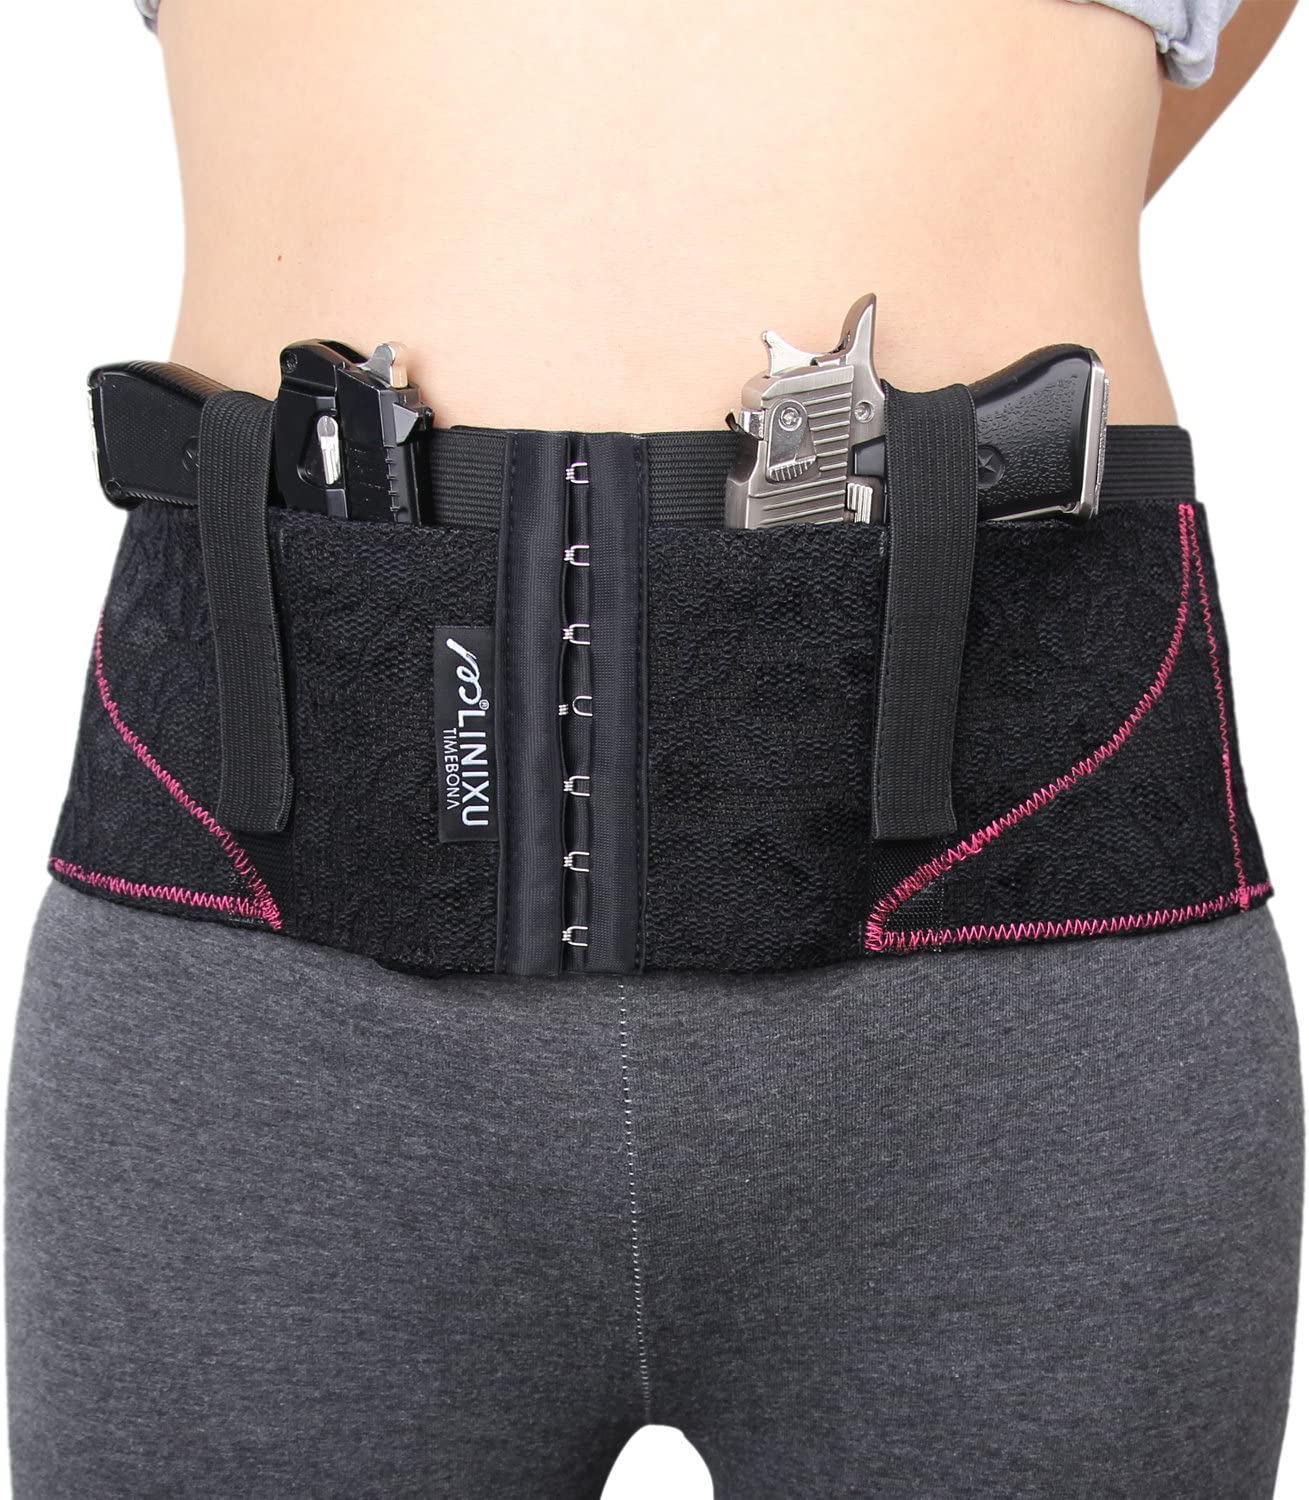 LINIXU Women's Concealed Carry Holster Hip Hugger Classic Lace